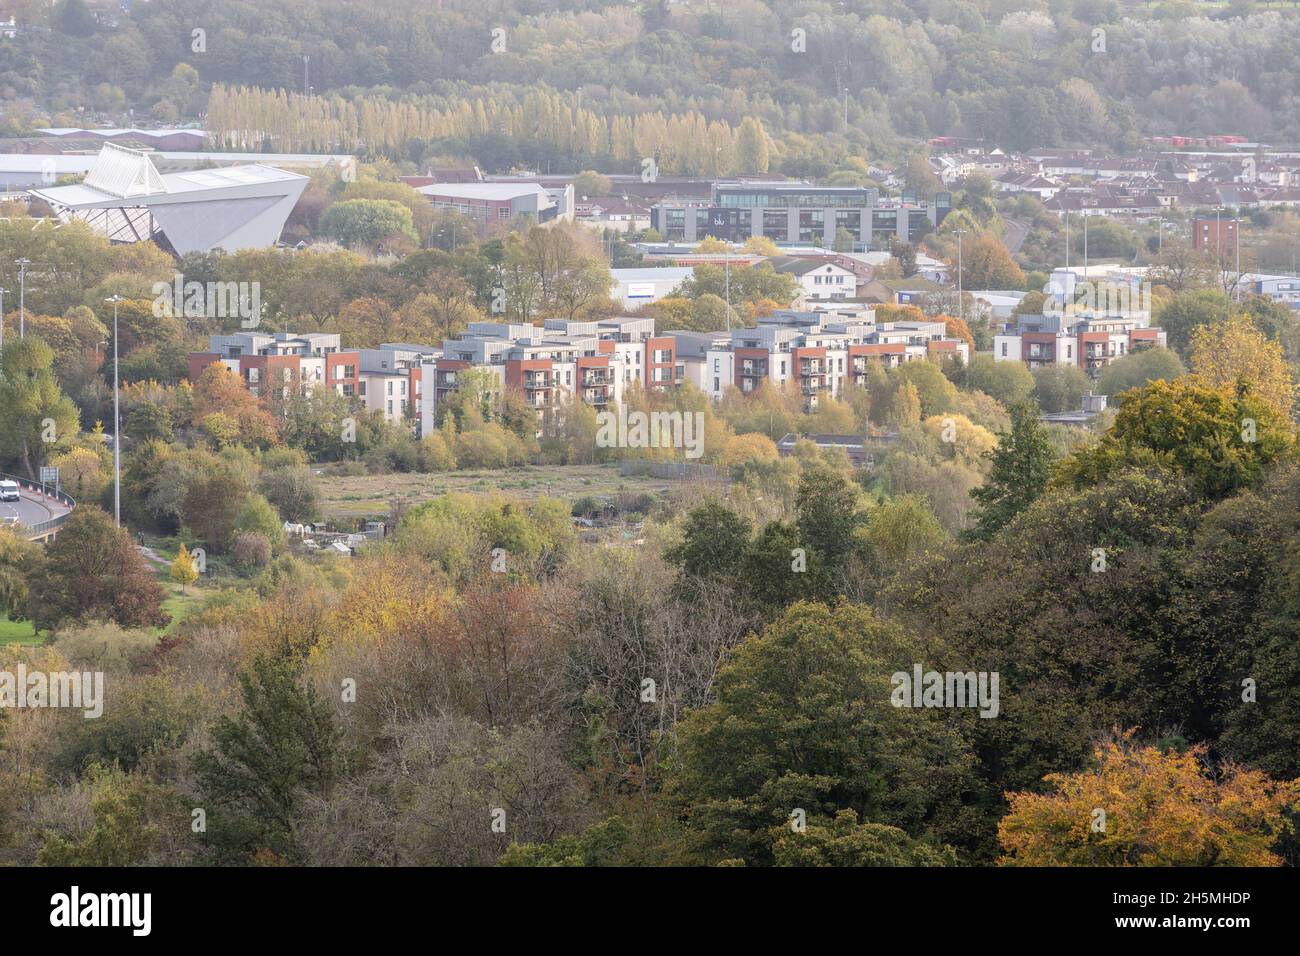 The cityscape of Ashton Vale in Bristol, including Ashton Gate Stadium, Imperial Tobacco campus, and the apartment buildings of Paxton Drive. Stock Photo